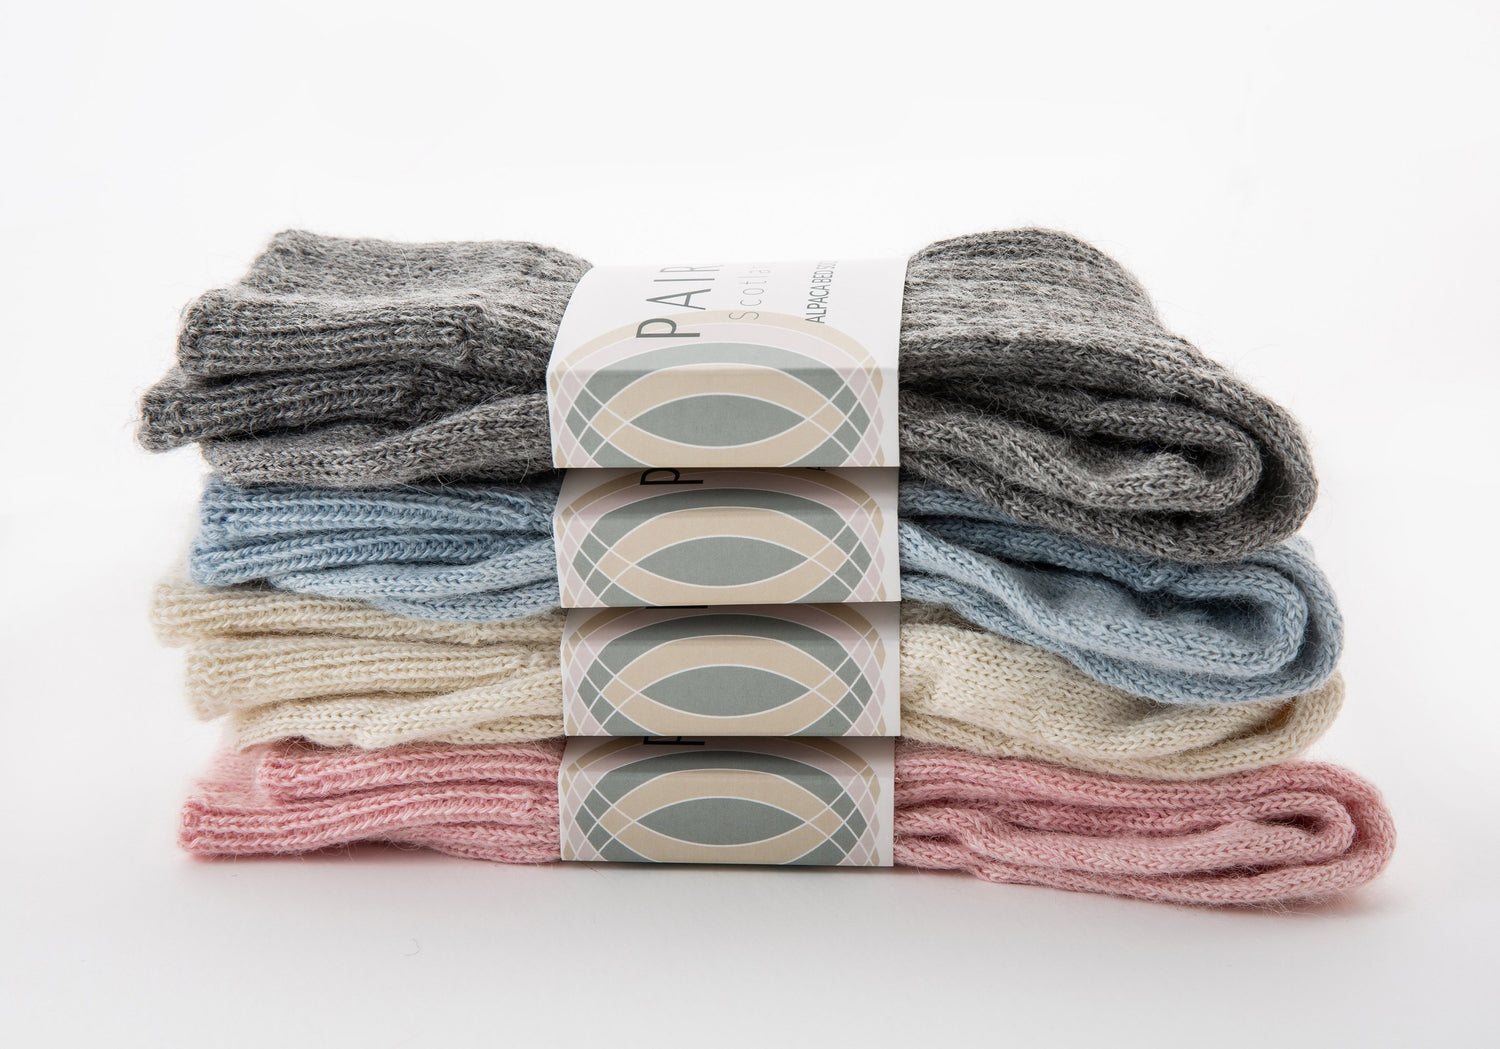 alpaca wool bed soft men and women sock range in soft hues, four pairs piled up